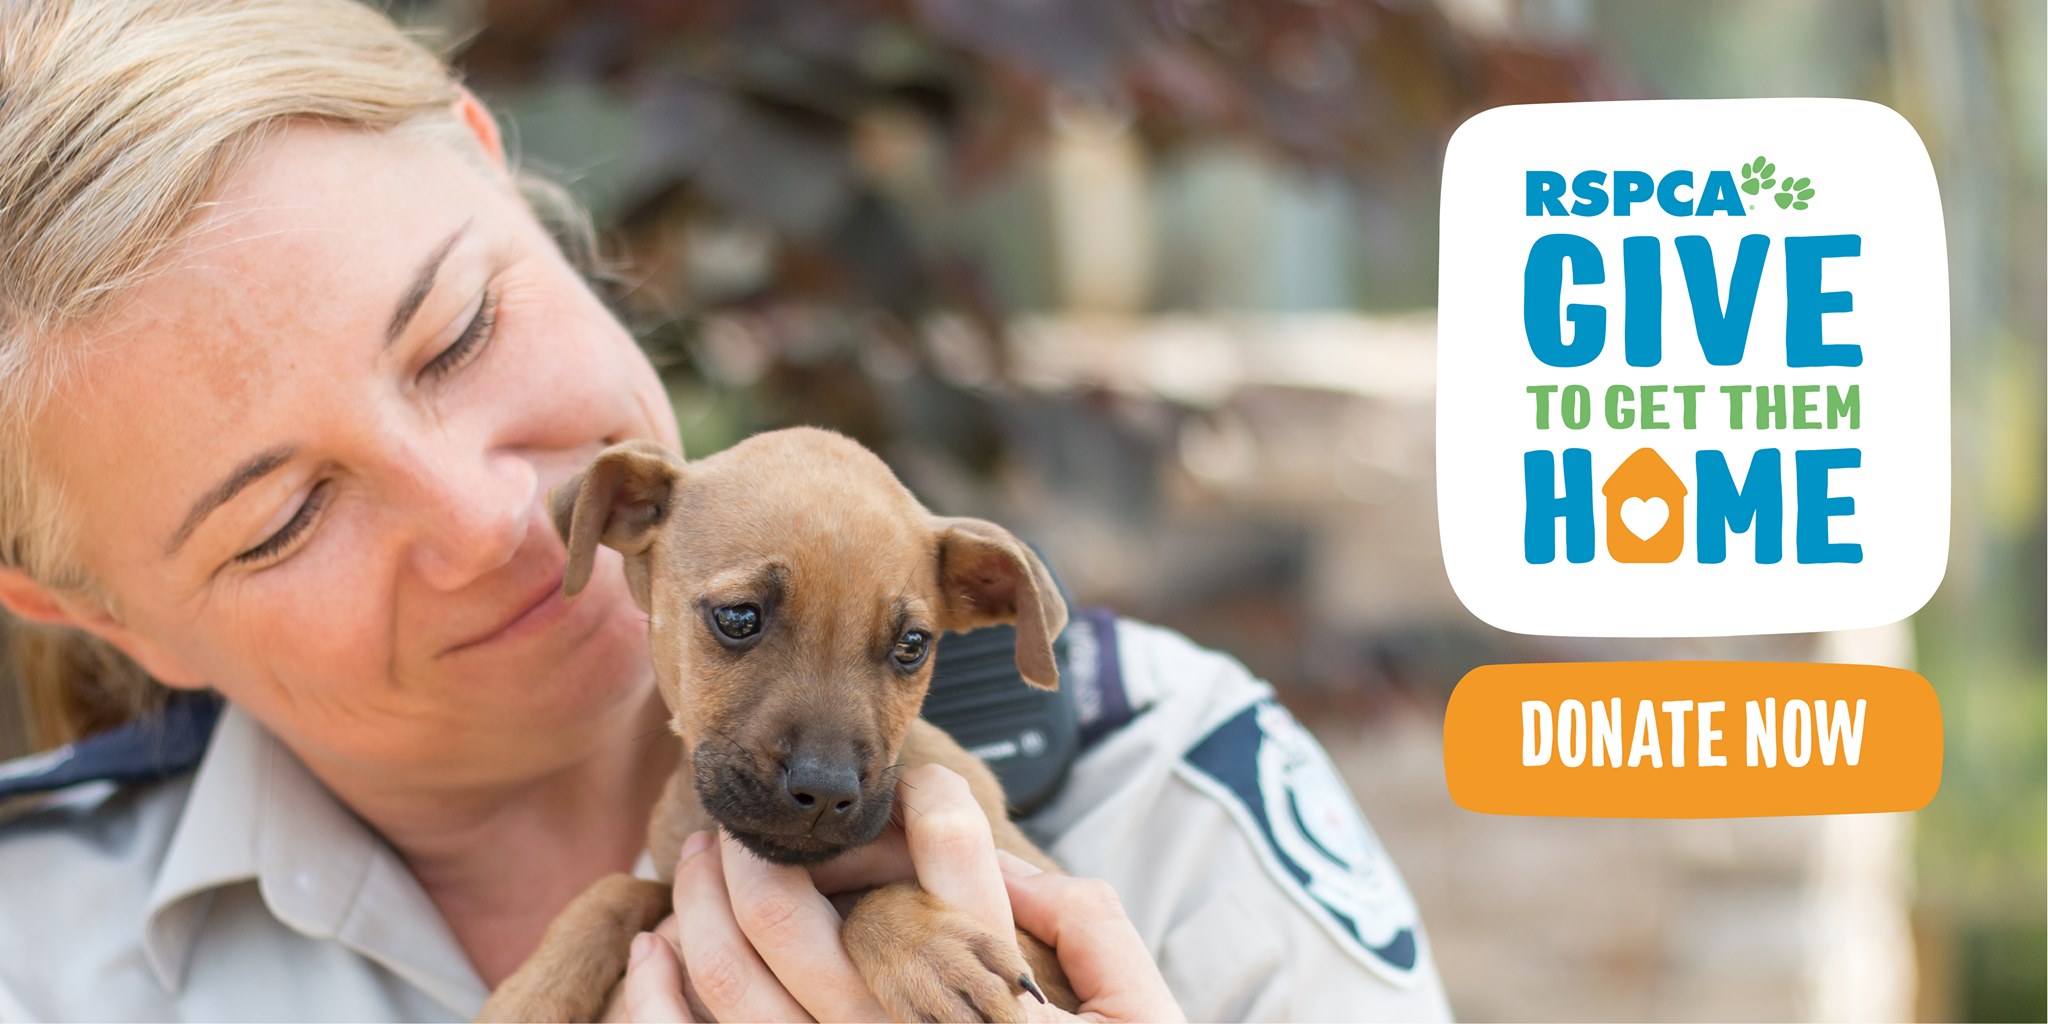 RSPCA NSW donate now